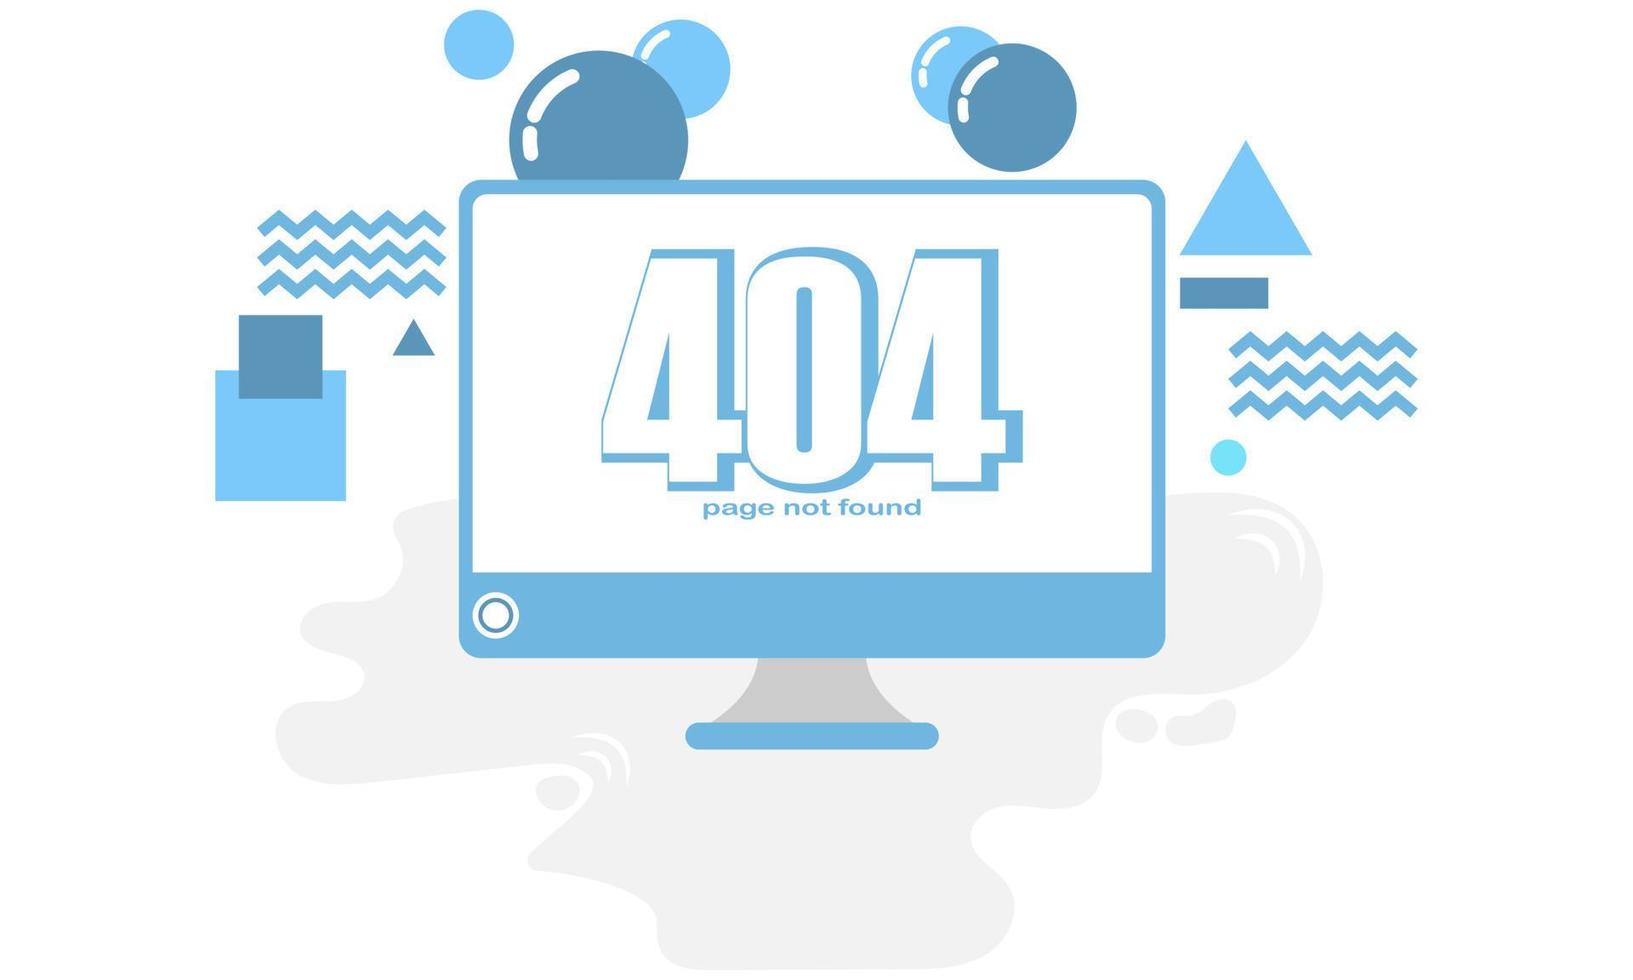 407 error page not found banner. Cable and socket. Cord plug. System error, broken page. Disconnected wires from the outlet vector